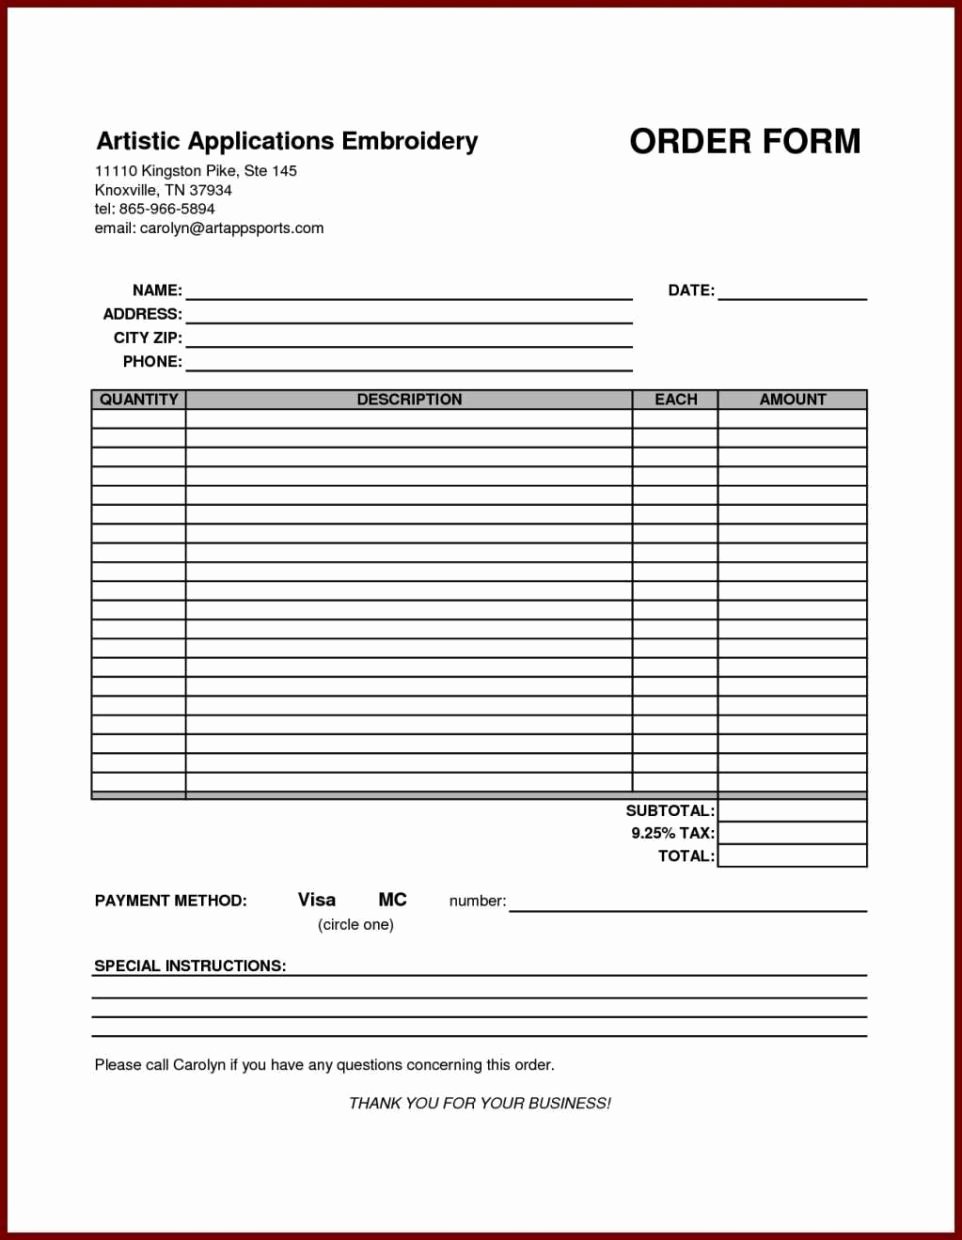 Sample order forms Template Unique Embroidery order form Template Free Sampletemplatess